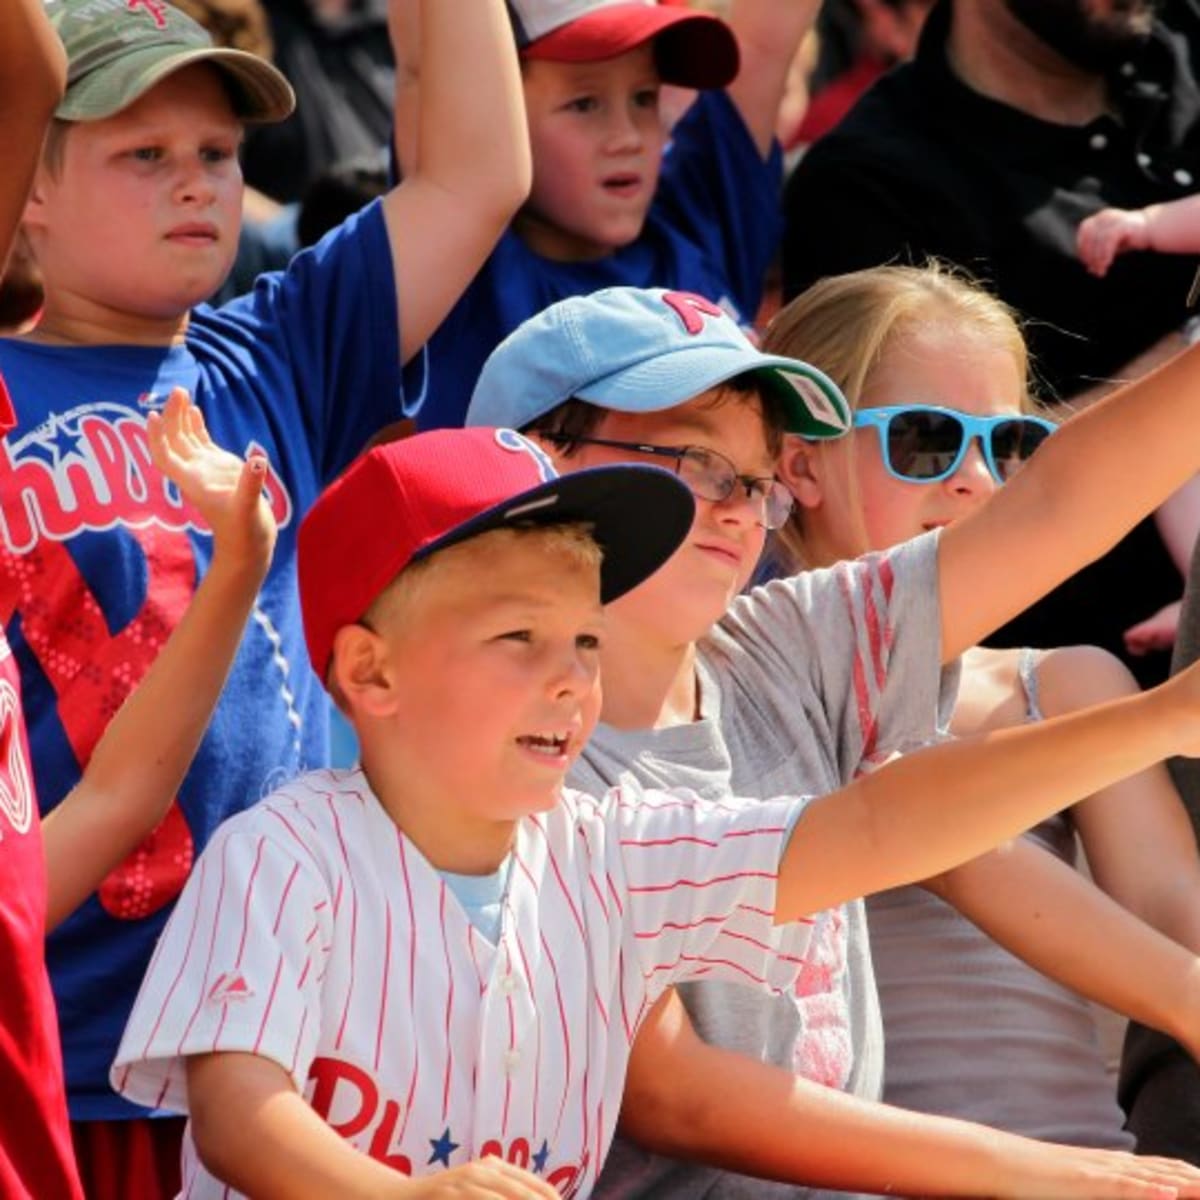 Young Phillies fan gifted helmet after irate Bryce Harper flips on